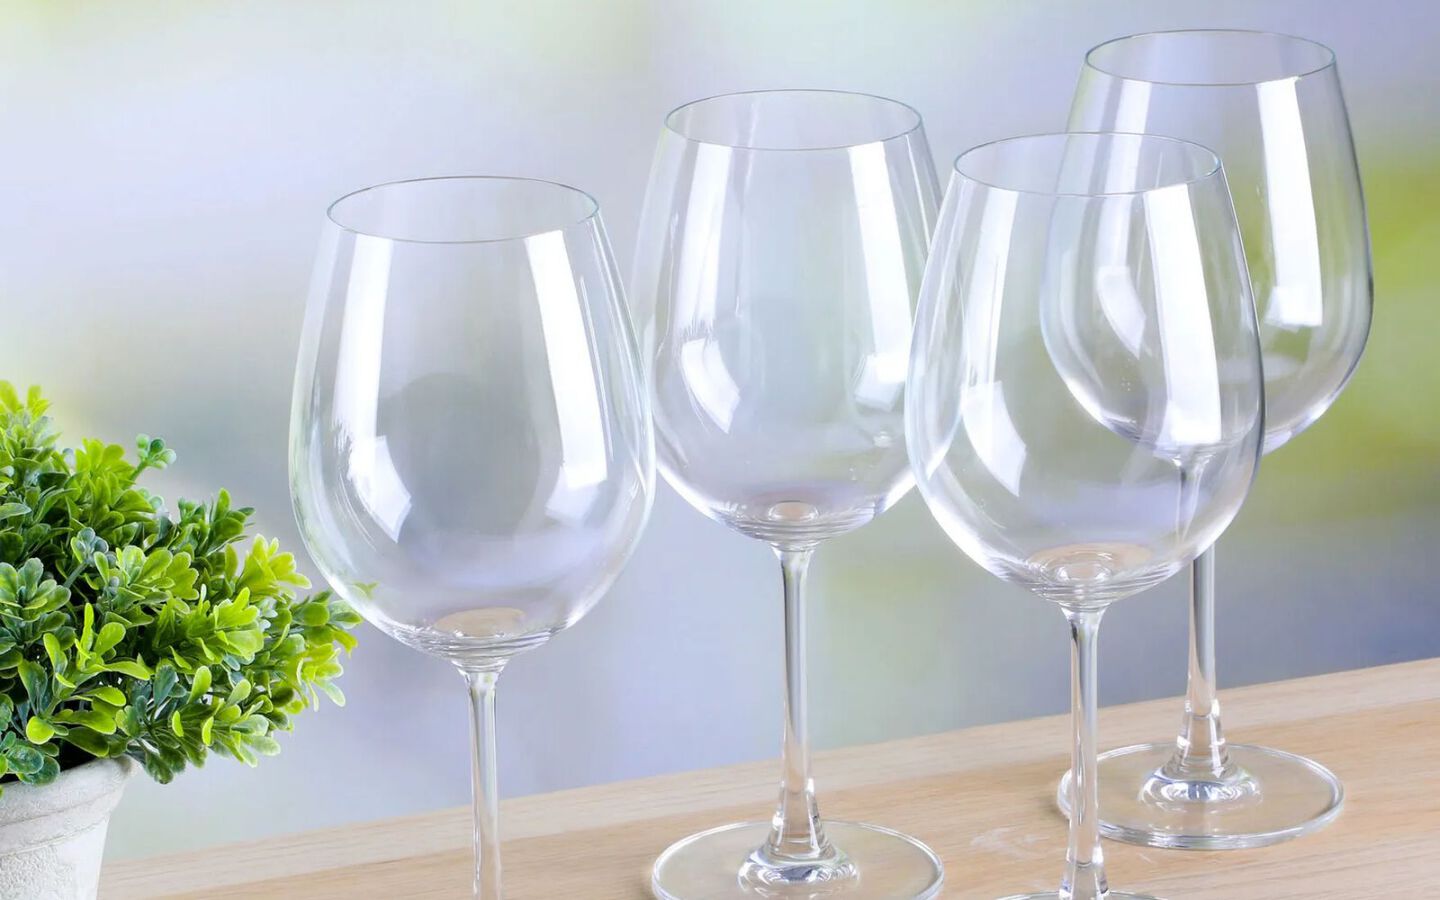 Four clear wine glasses sitting on the edge of a table